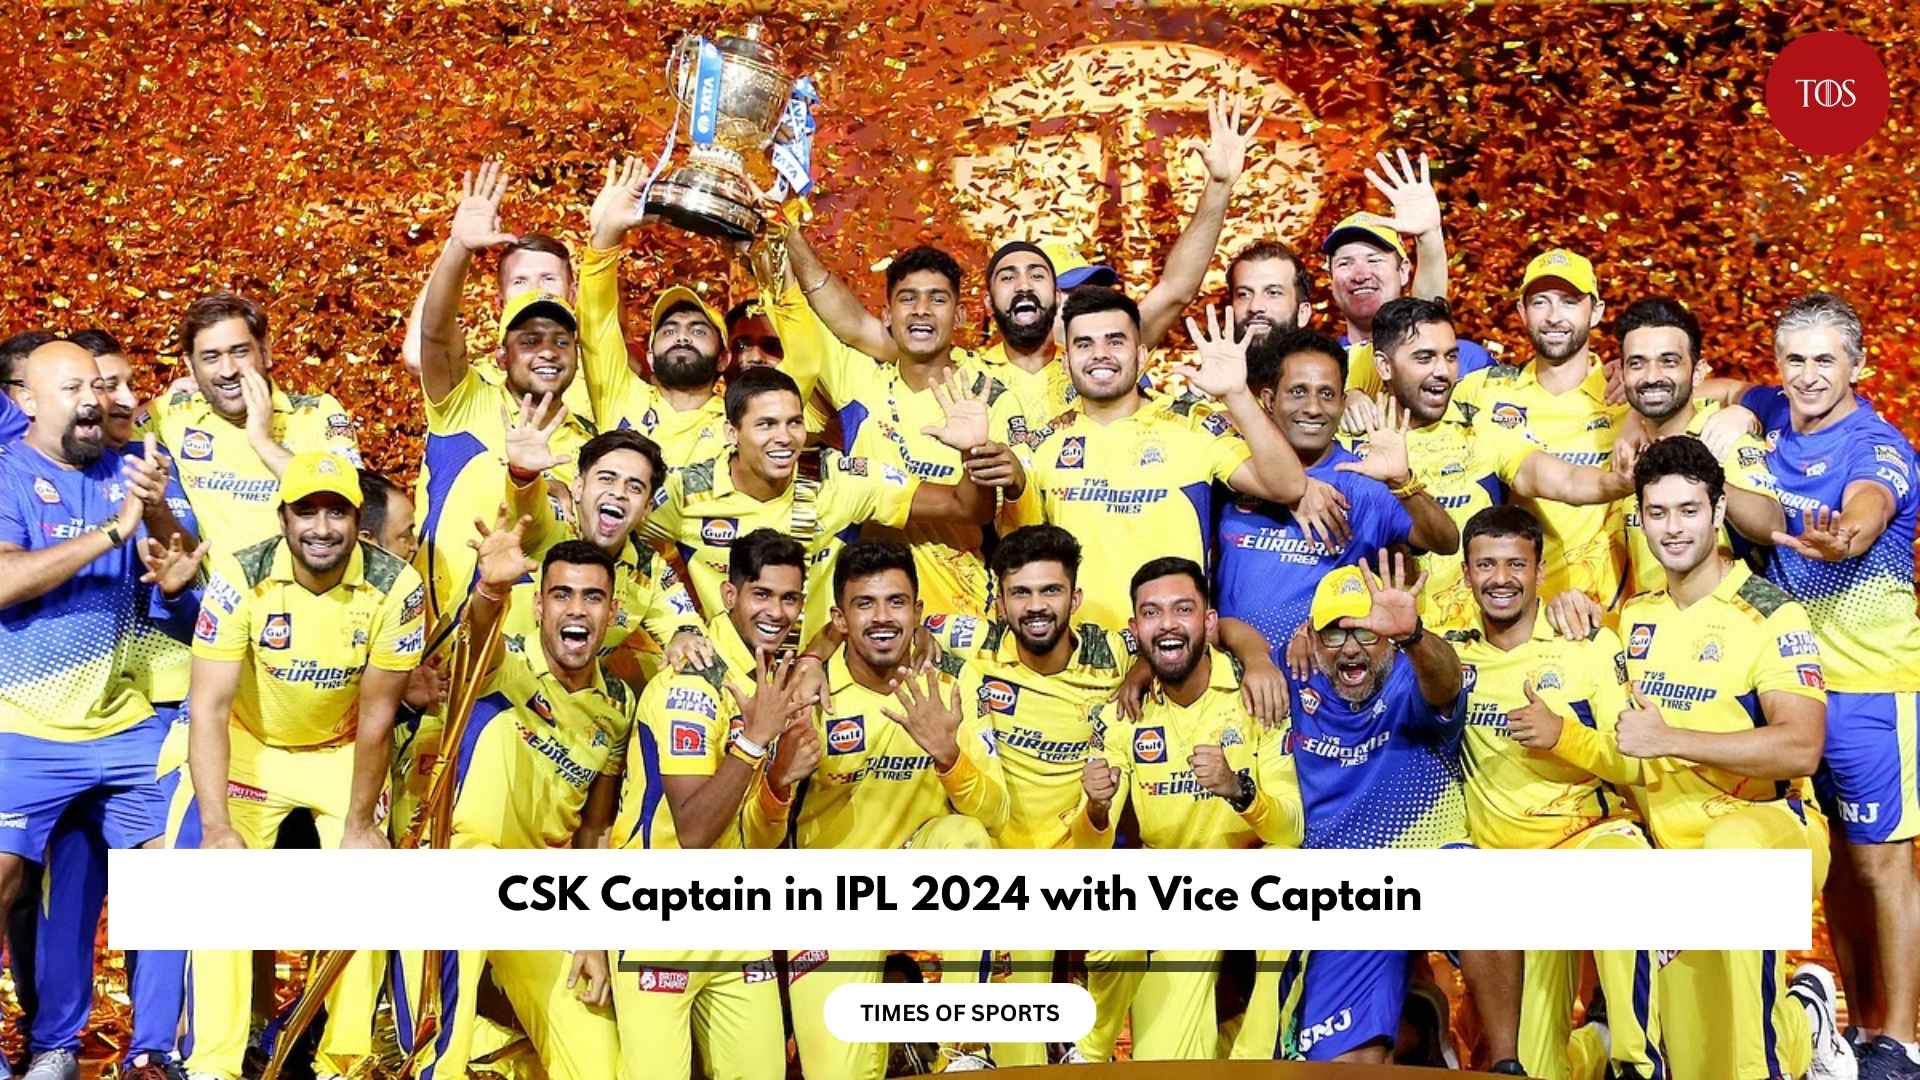 CSK Captain in IPL 2024 with Vice Captain